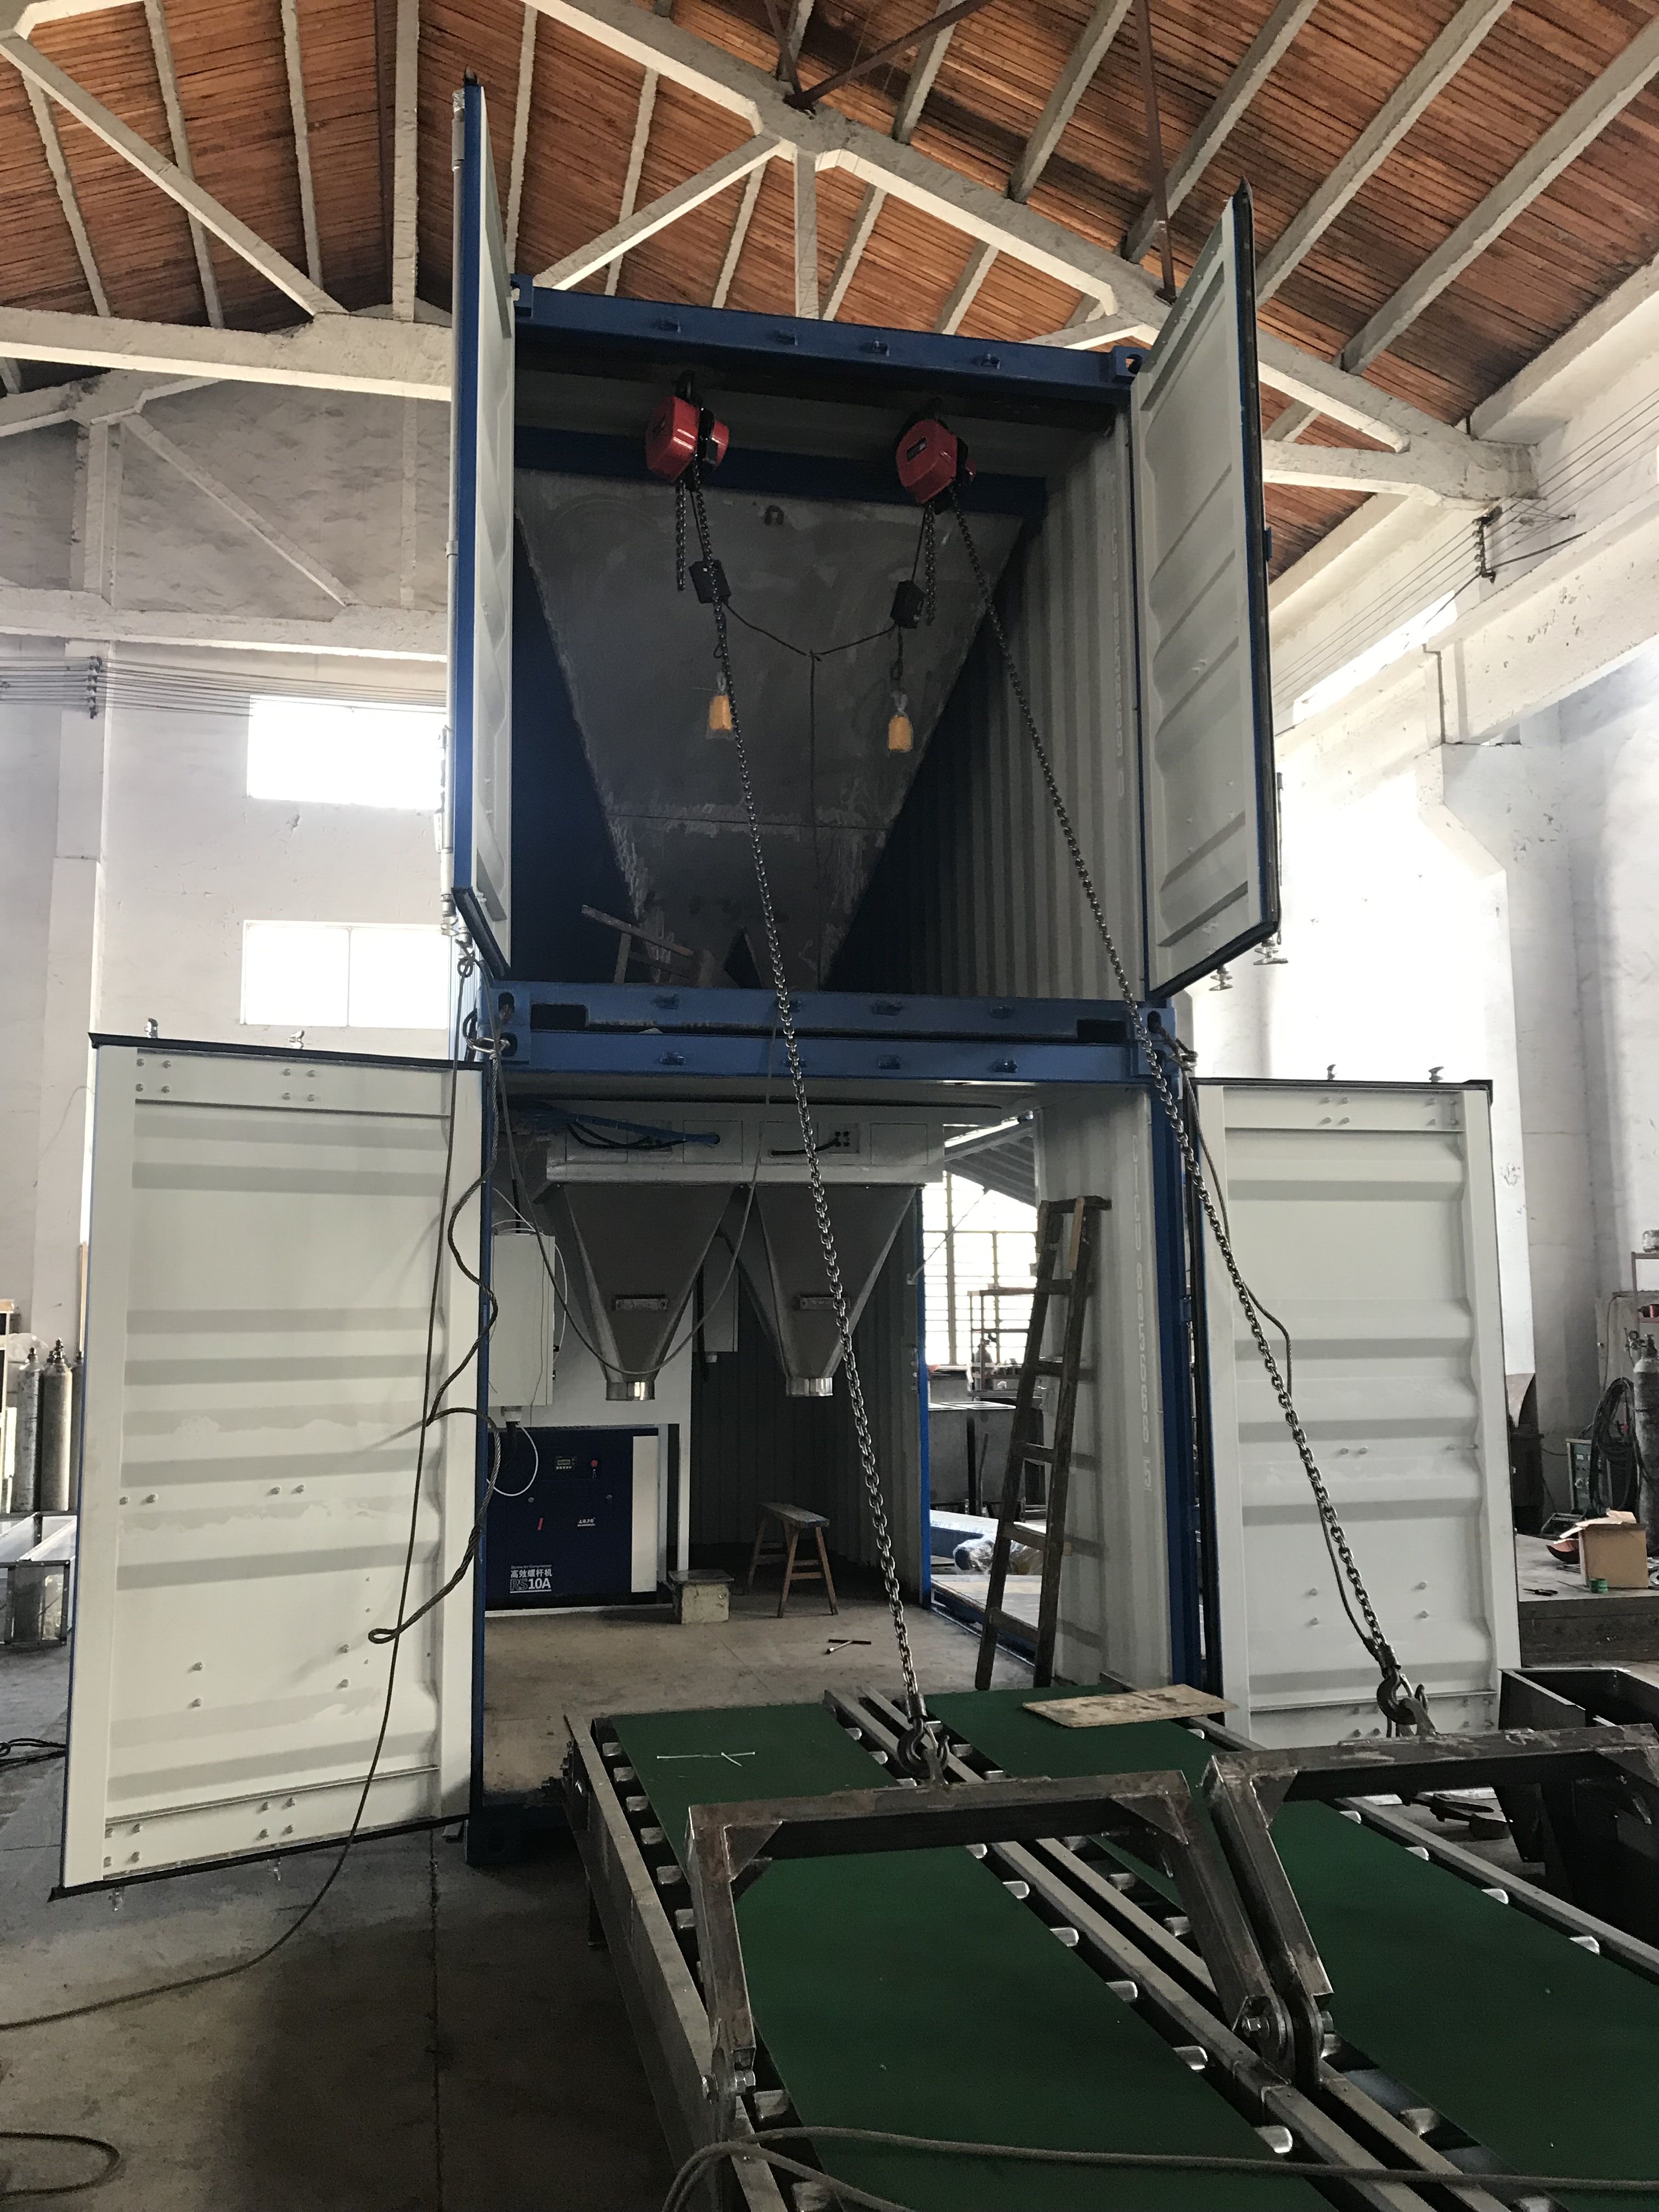 Fully Automatic Packing Palletizing Line, Containerised Bagging System, Mobile Bagging Unit, Mobile Containserized Bagging Unit, Fully Automatic Packing System, Jumbo Bag Filling Machine, Super Sack F